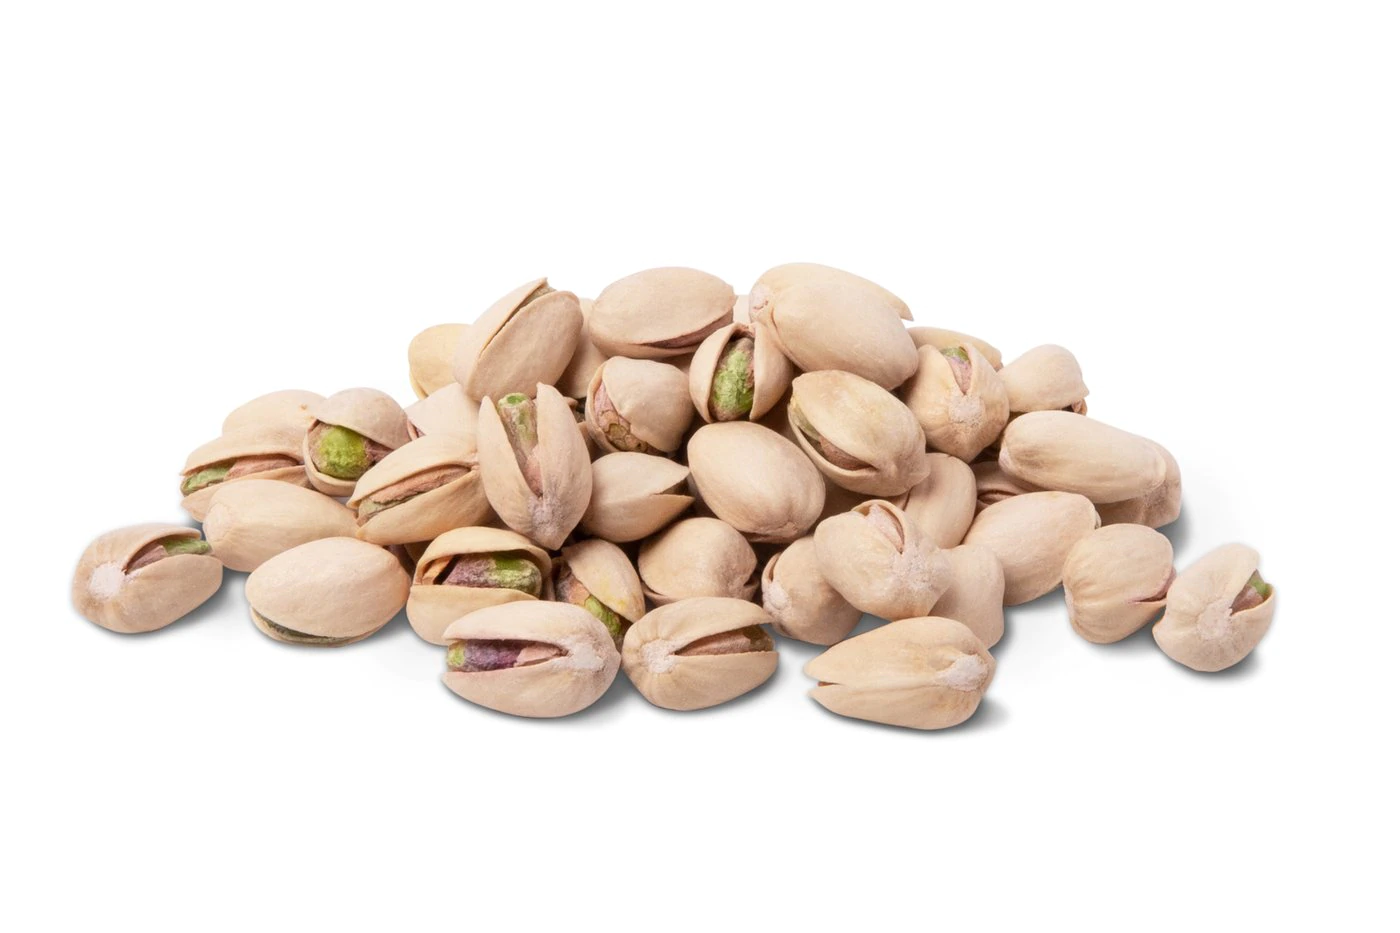 Buy Salted Roasted Pistachios and Caramelized Almonds Online